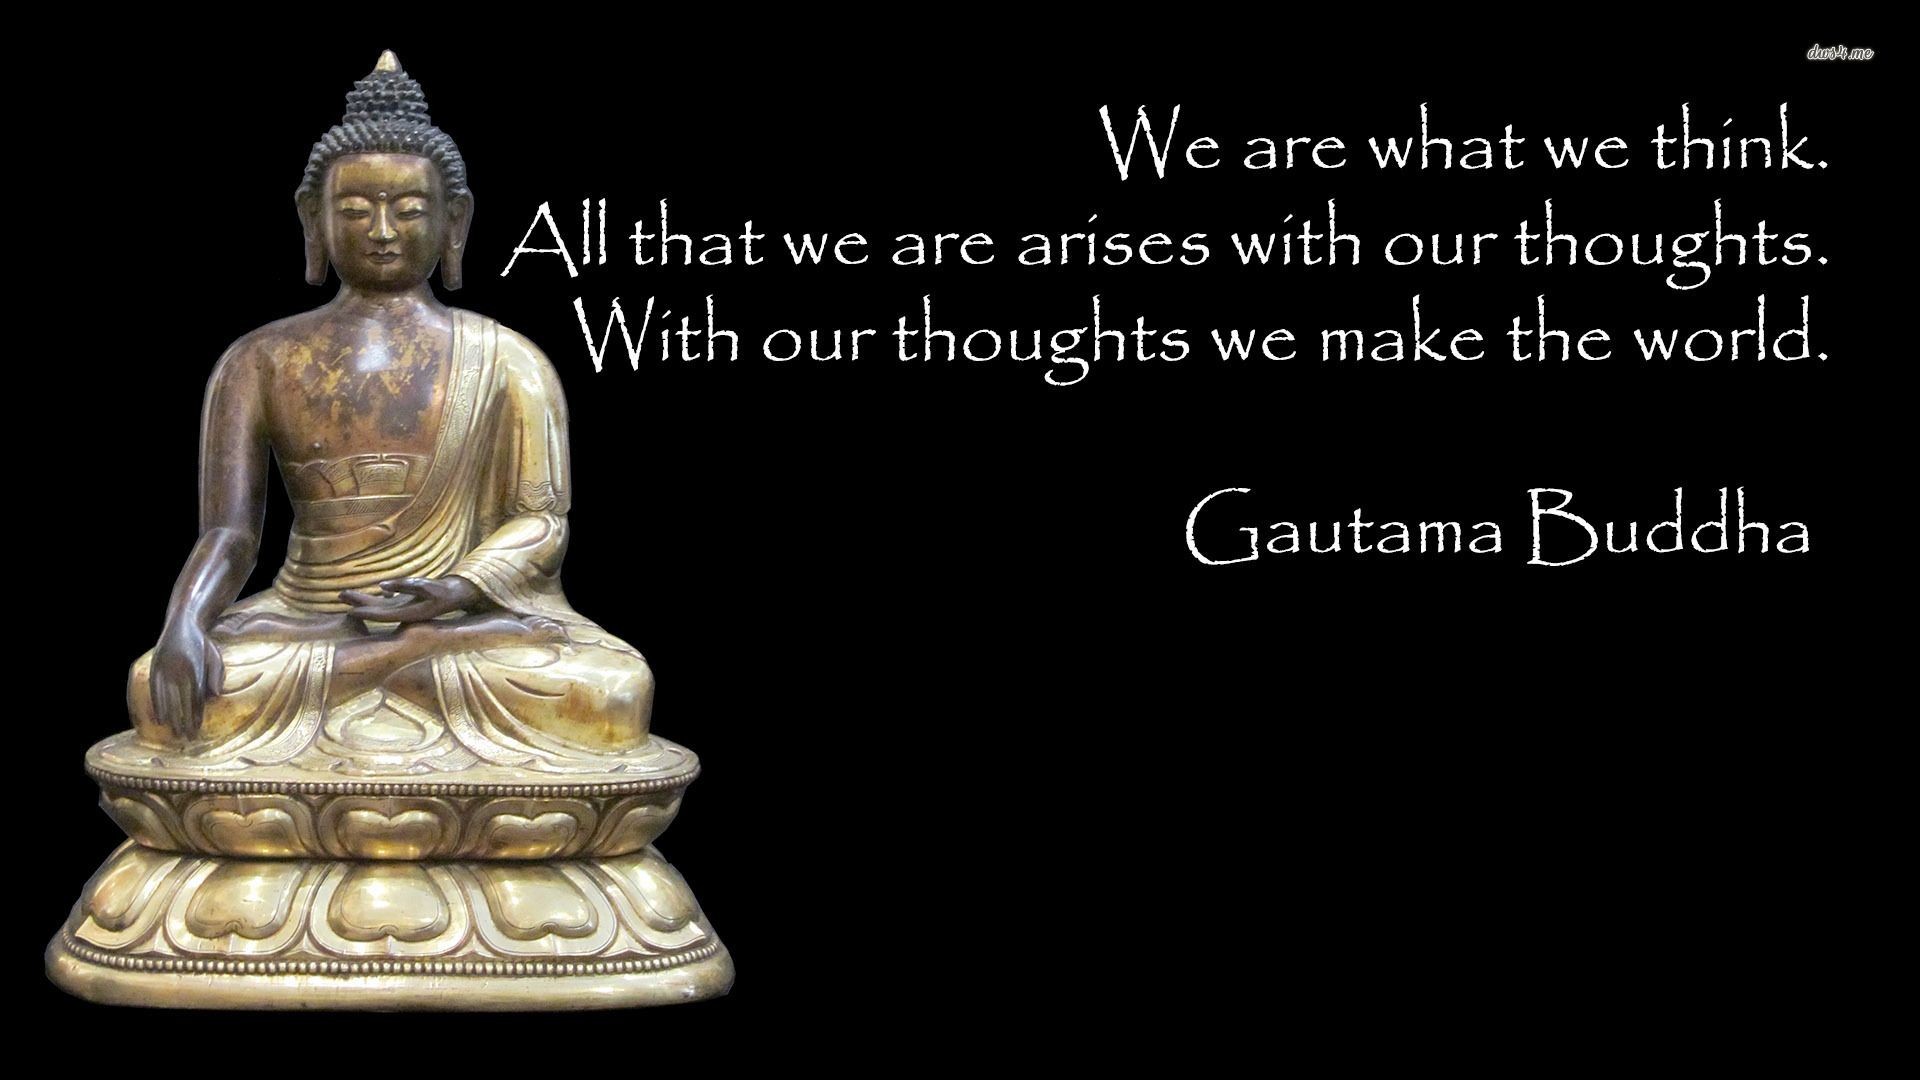 1920x1080 Buddha quote wallpaper - Quote wallpapers - #22540